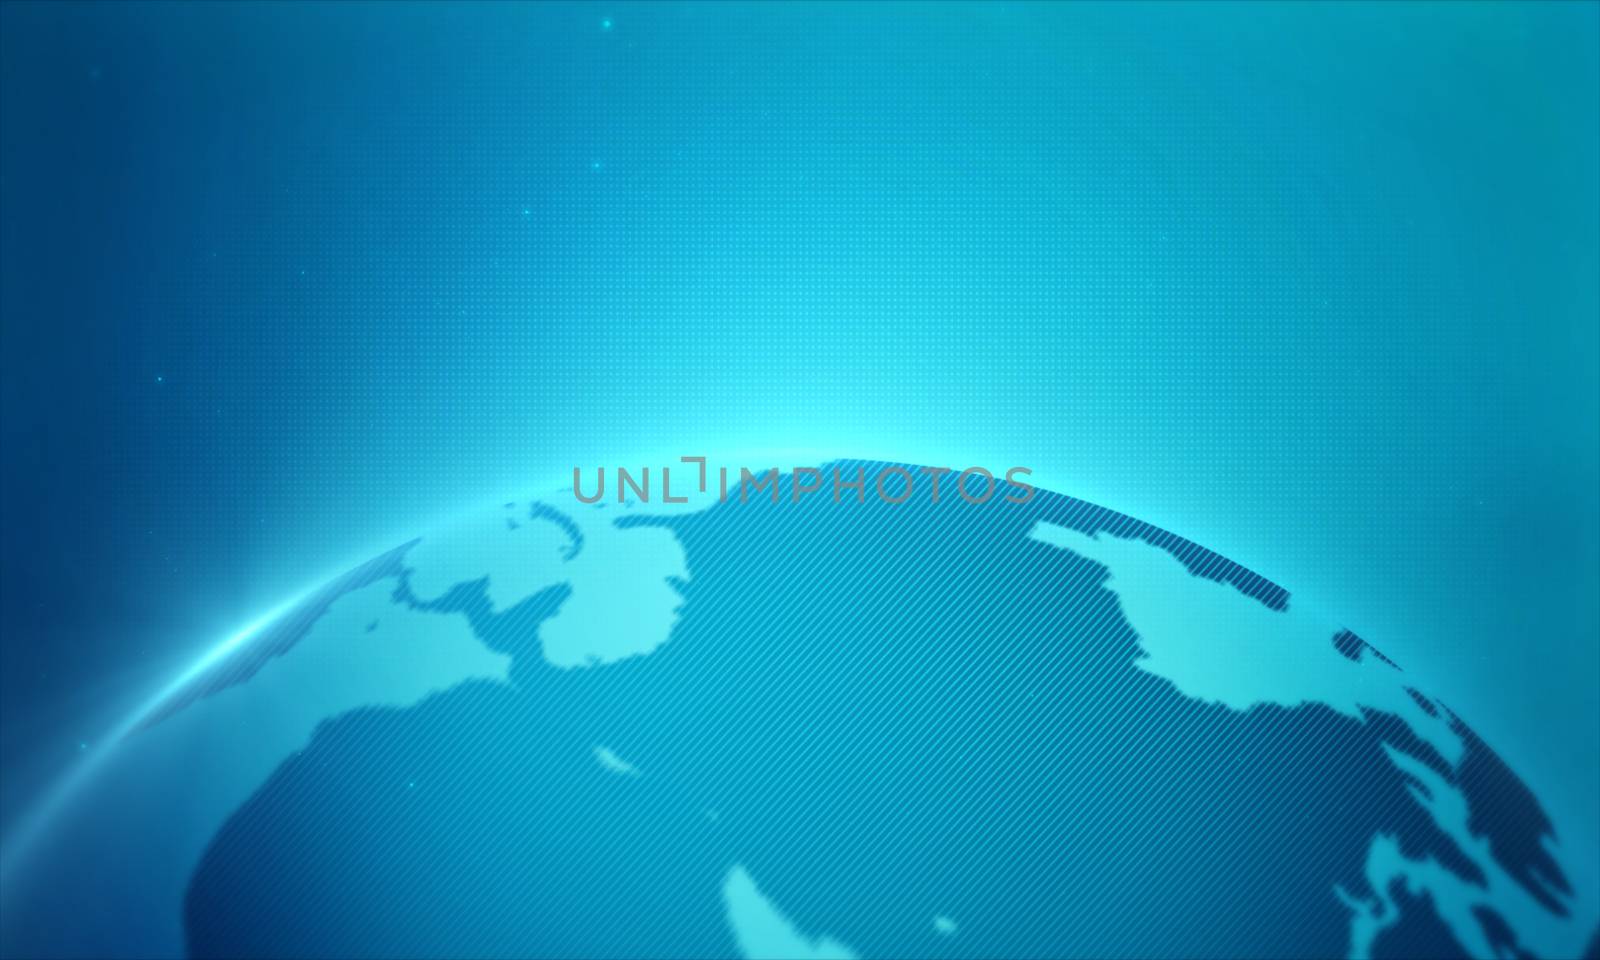 News corporate background blue.Abstract global map business presentation concept.